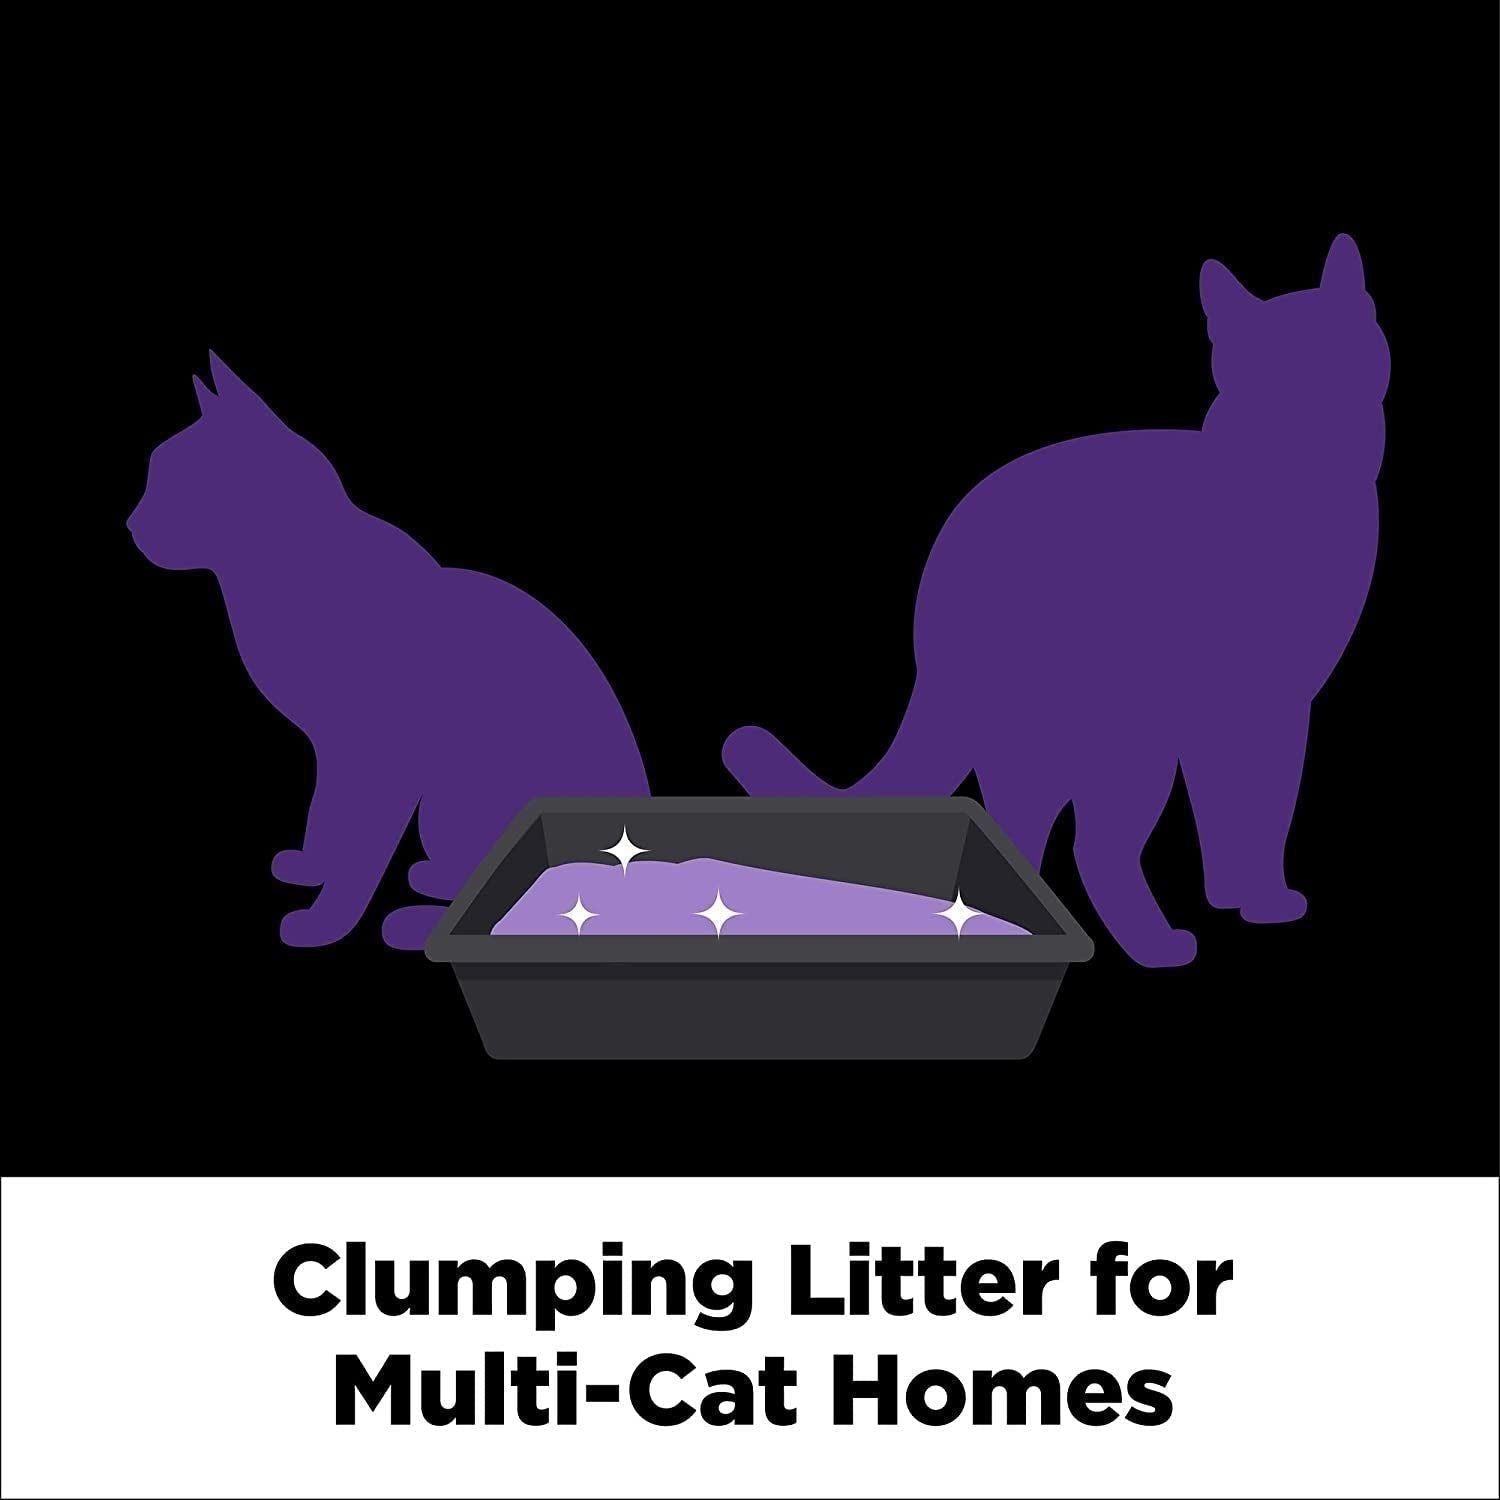 Clump & Seal Easy Clean-Up Clumping Cat Litter